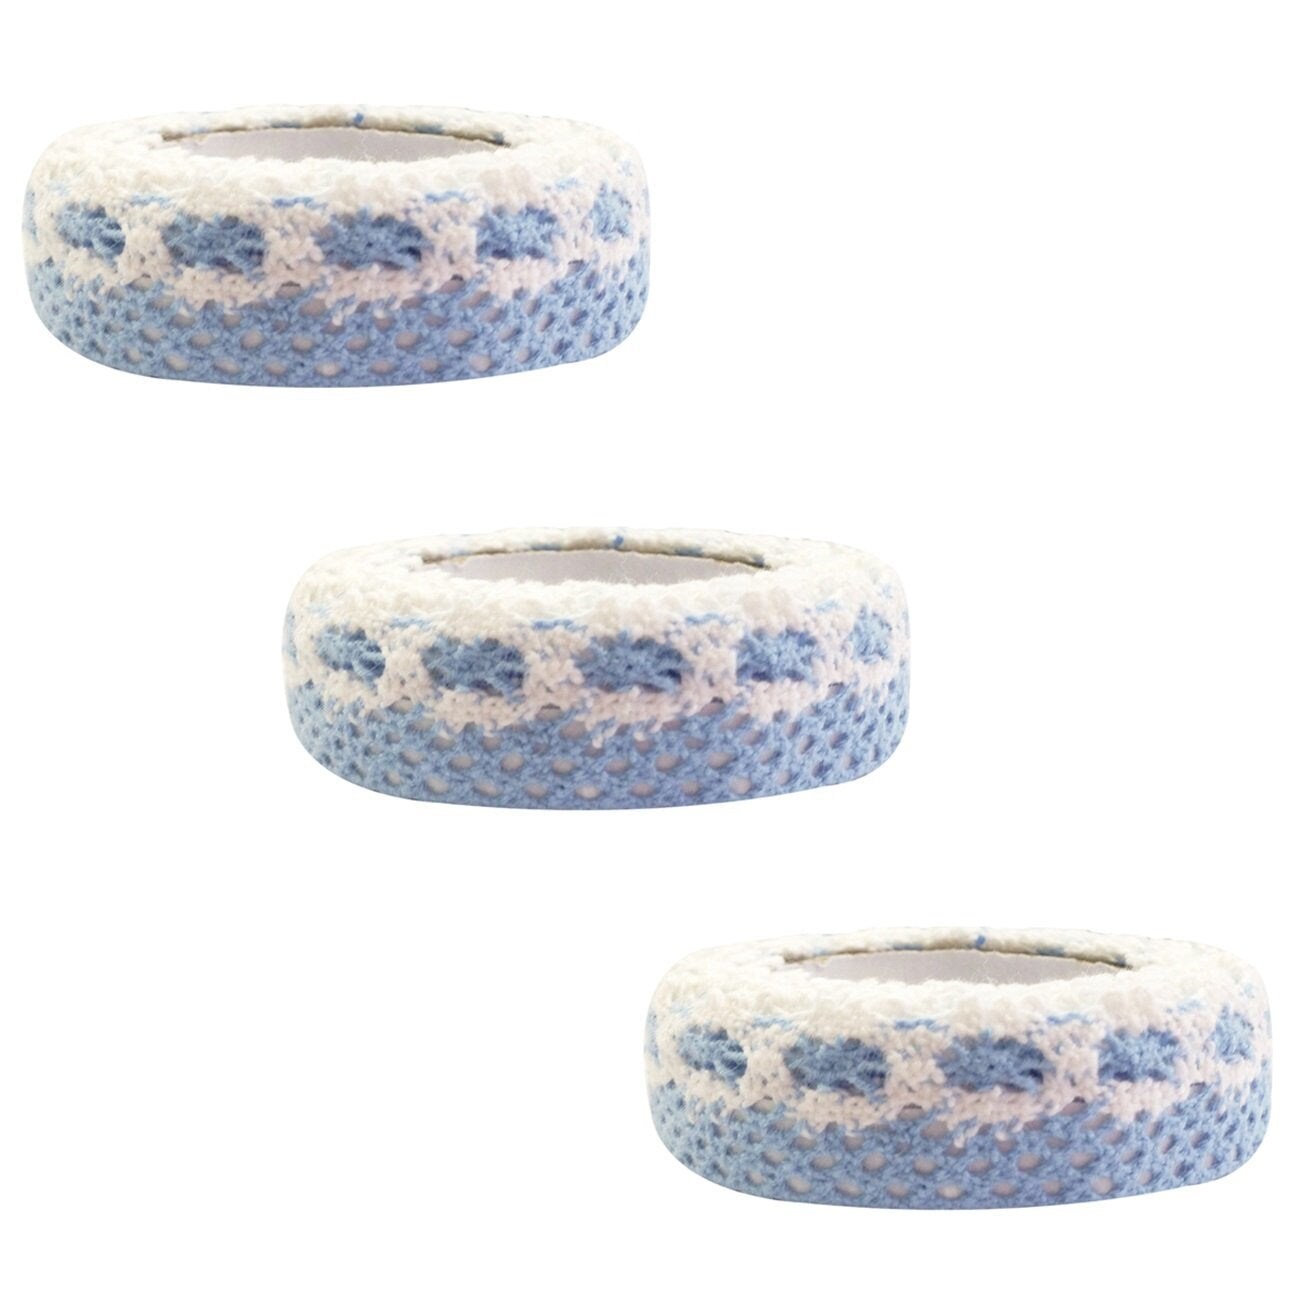 Blue Foil & Glitter Crafting Tape Set by Recollections™